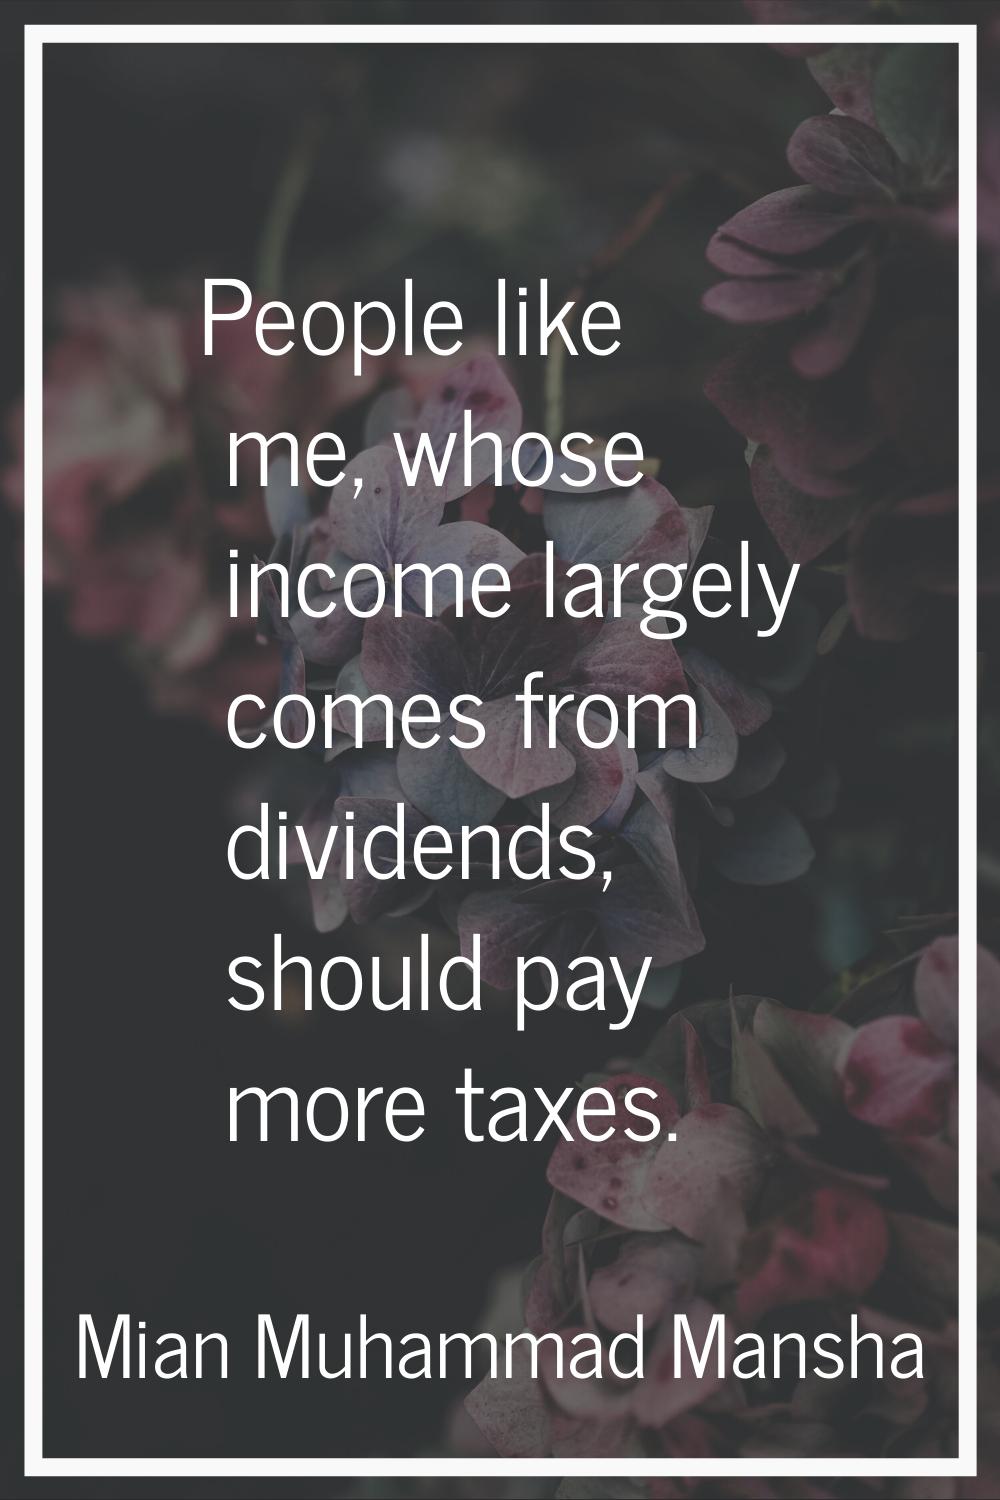 People like me, whose income largely comes from dividends, should pay more taxes.